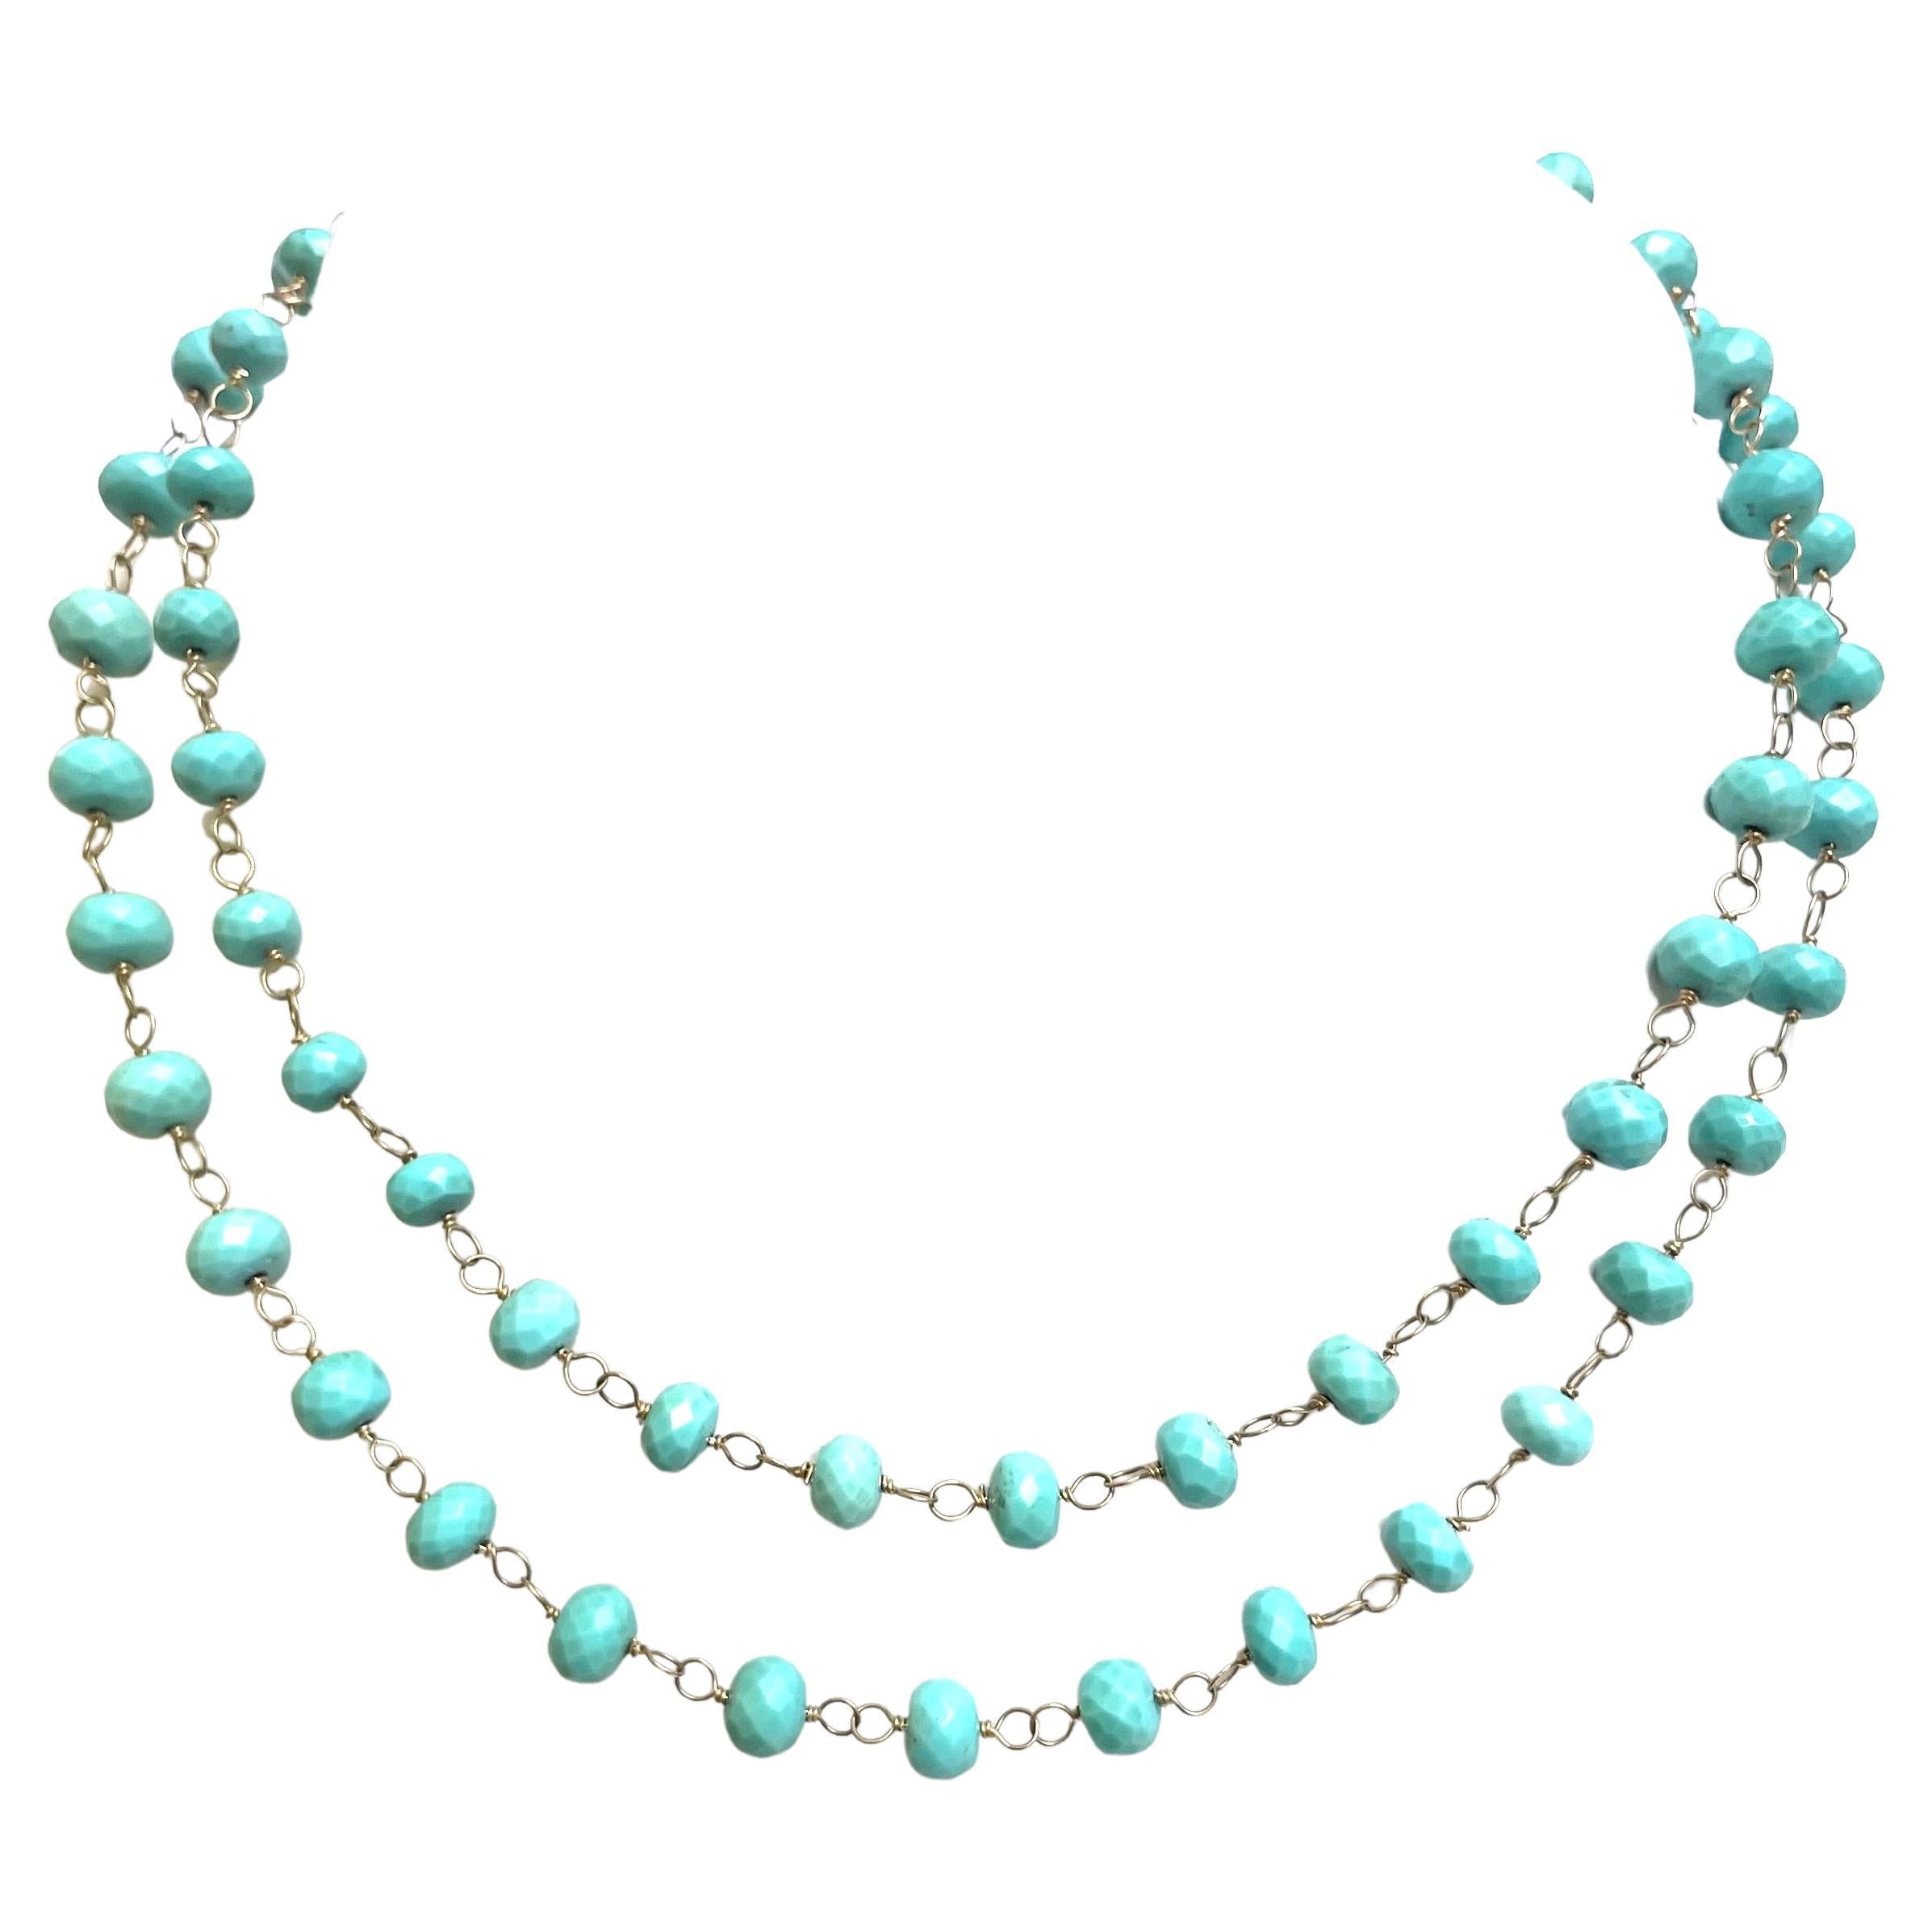 Sleeping Beauty Turquoise Long Paradizia Necklace (shown doubled)